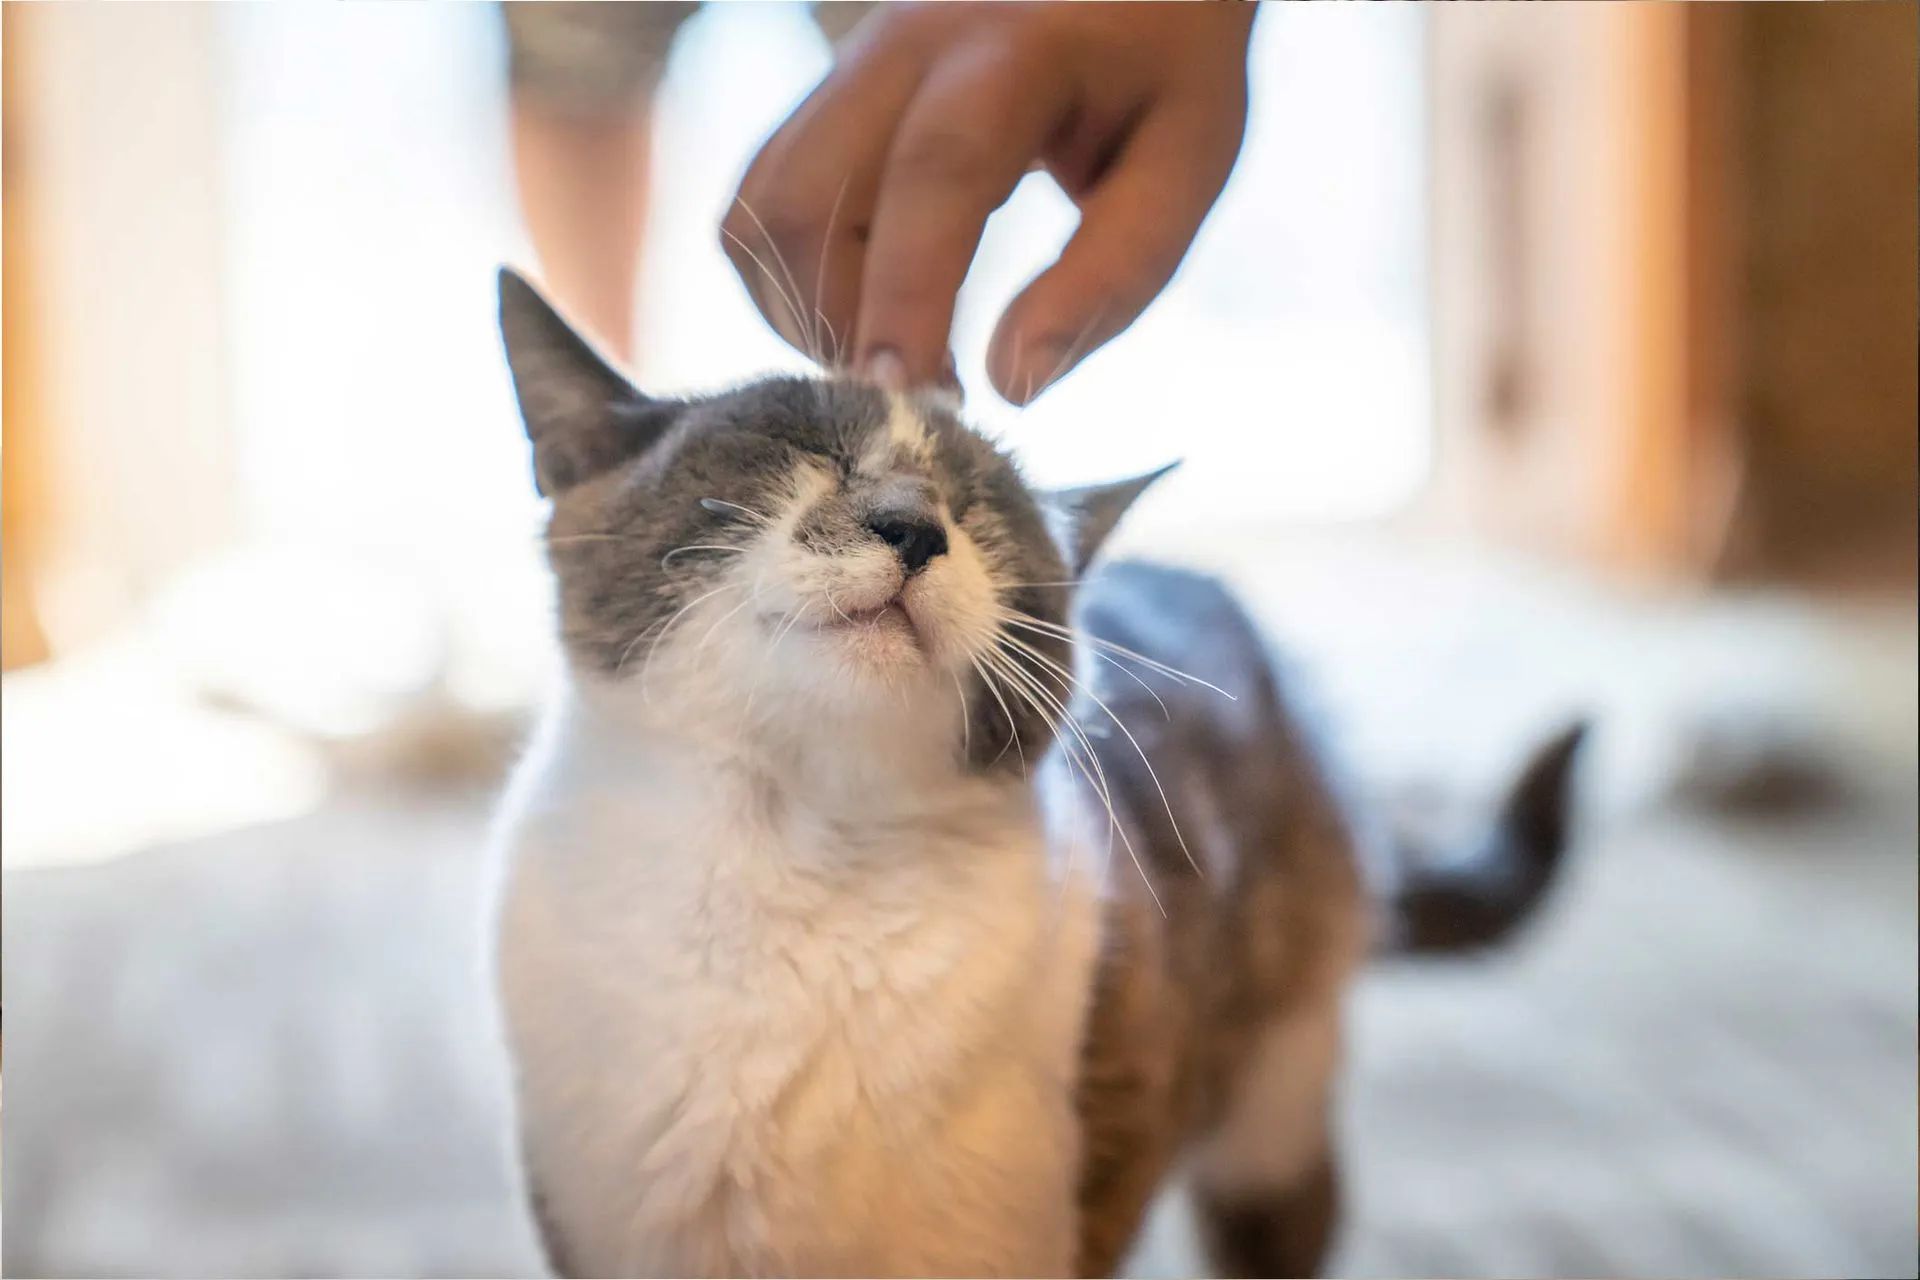 a person is petting a cat with their finger